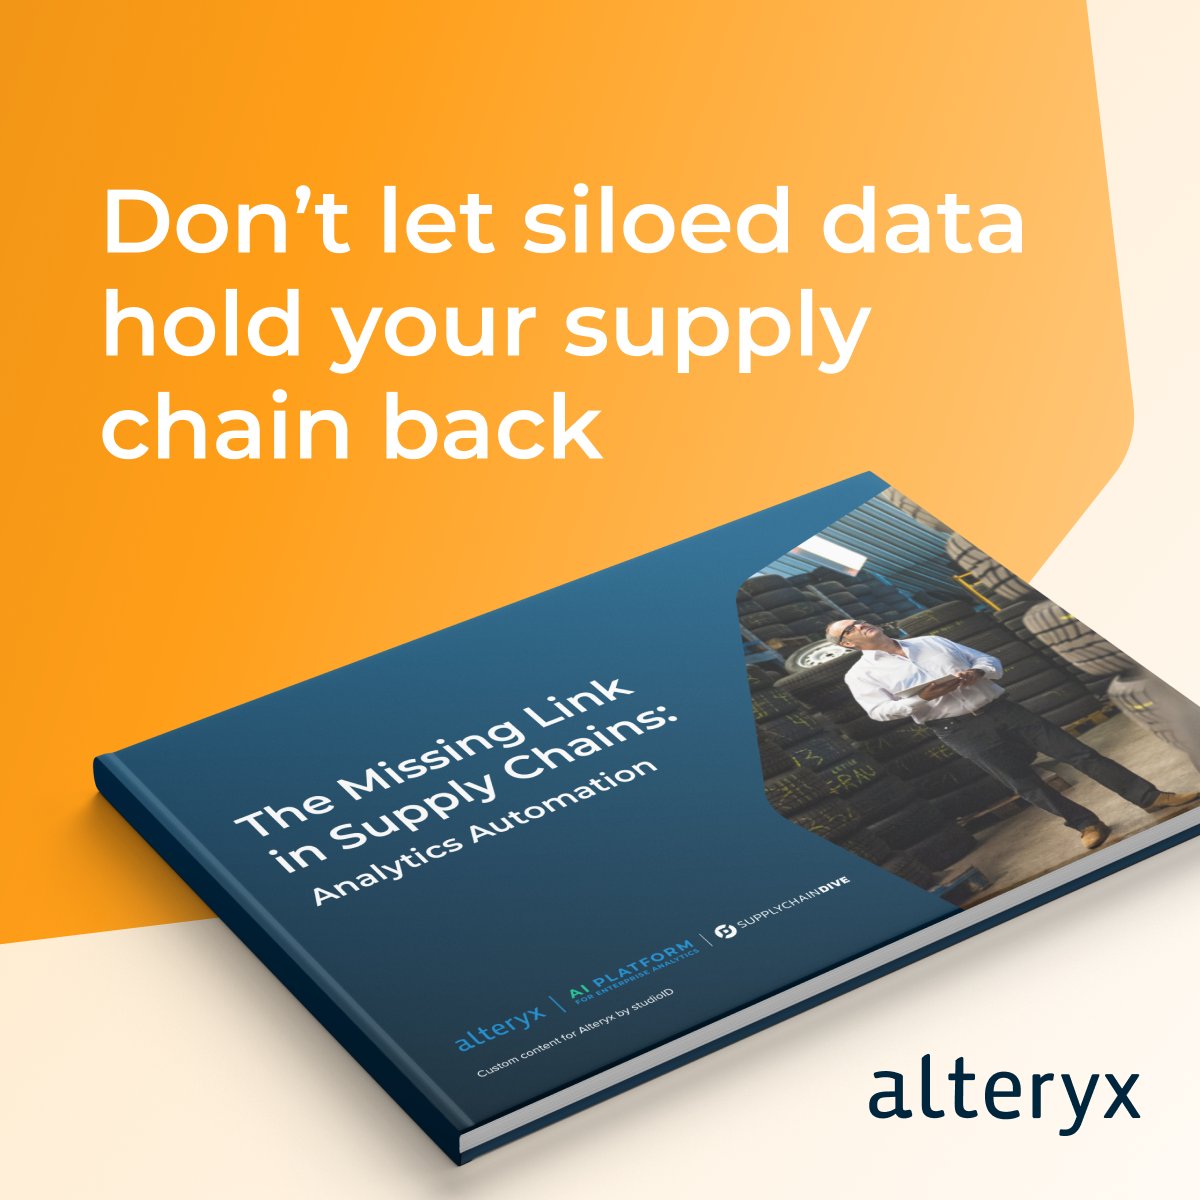 Despite investing in new #SupplyChain tech, many businesses are still struggling. Lack of resources, time and talent has led to a disconnect. Our latest e-book with @SupplyChainDive offers a powerful solution: #AnalyticsAutomation. Get it now: ow.ly/zrin50RpxR8